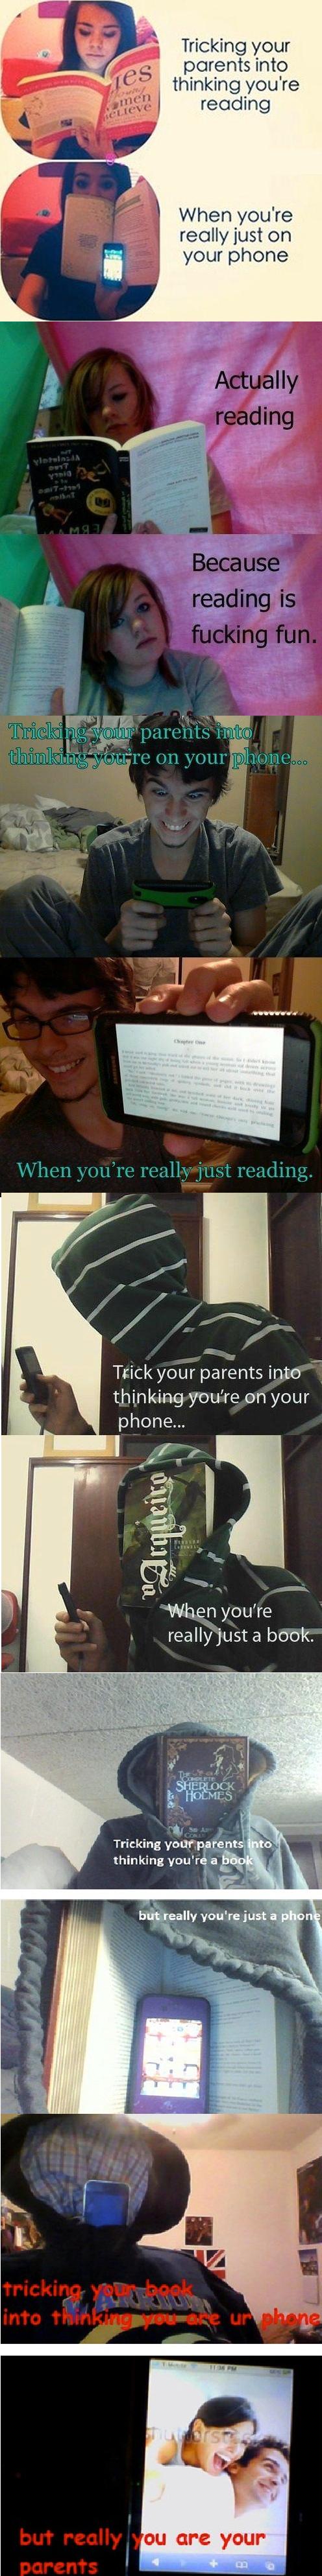 tricking your parents into thinking you are reading, when you're really just on your phone, lol, wtf